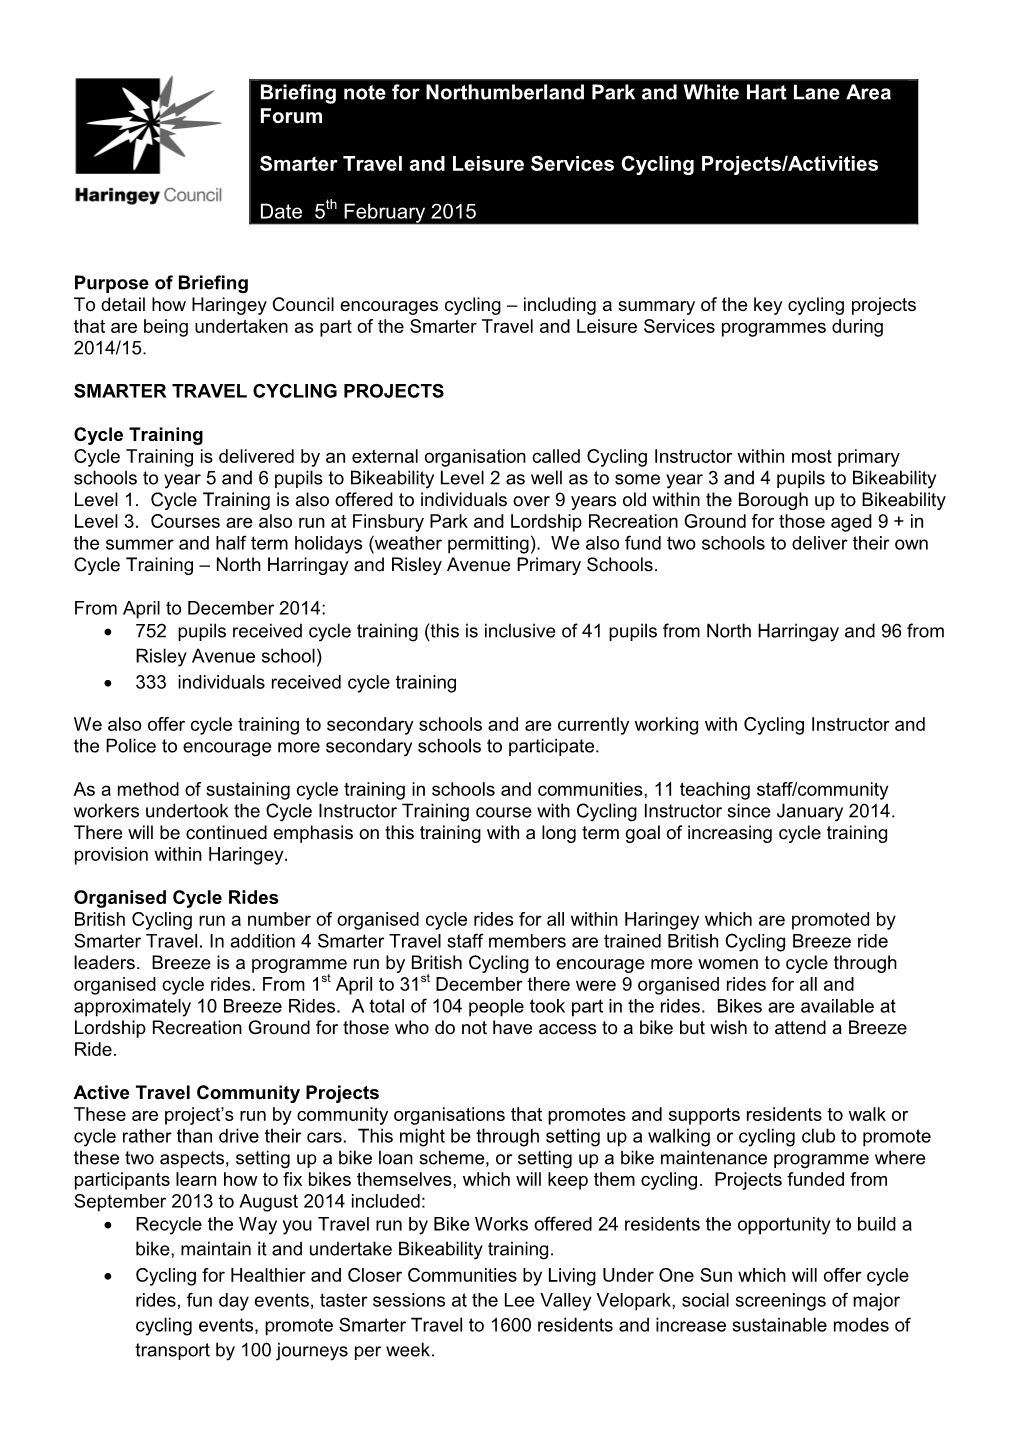 Briefing Note Cycling Projects 5Th February 2015